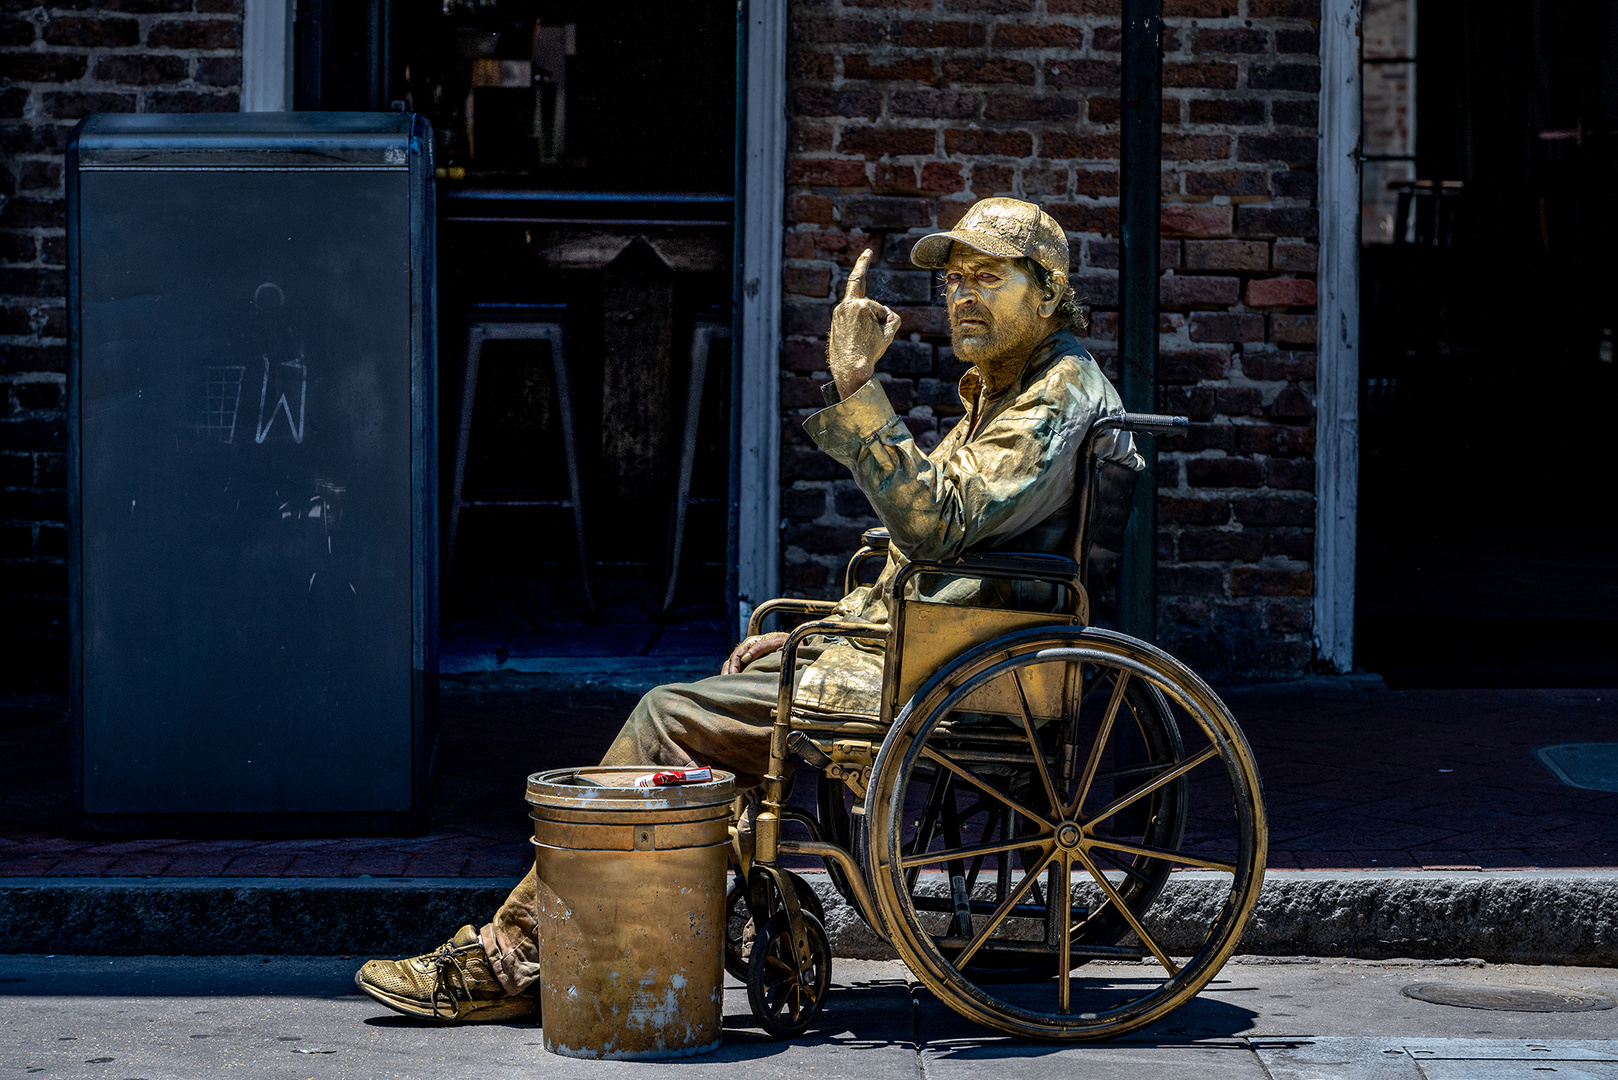 New Orleans - The Man with the golden finger